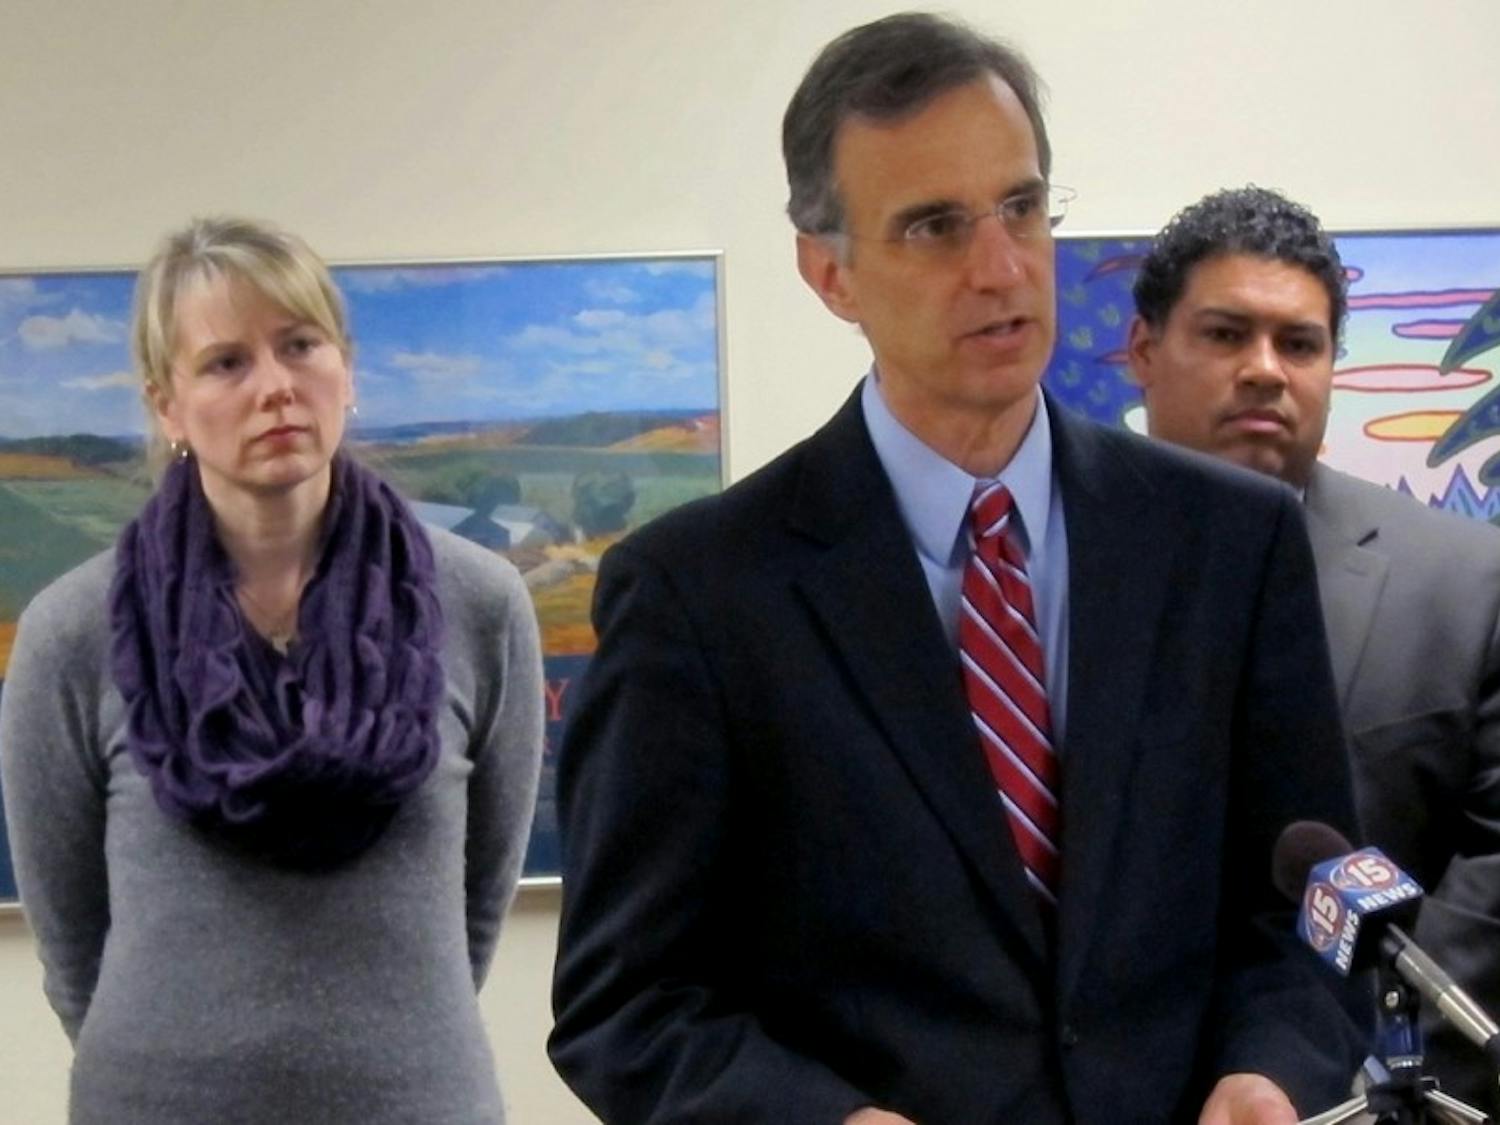 Dane County Executive Joe Parisi suspended all nonessential county official travel to North Carolina and Mississippi Monday in response to the states' LGBT discriminatory laws.&nbsp;